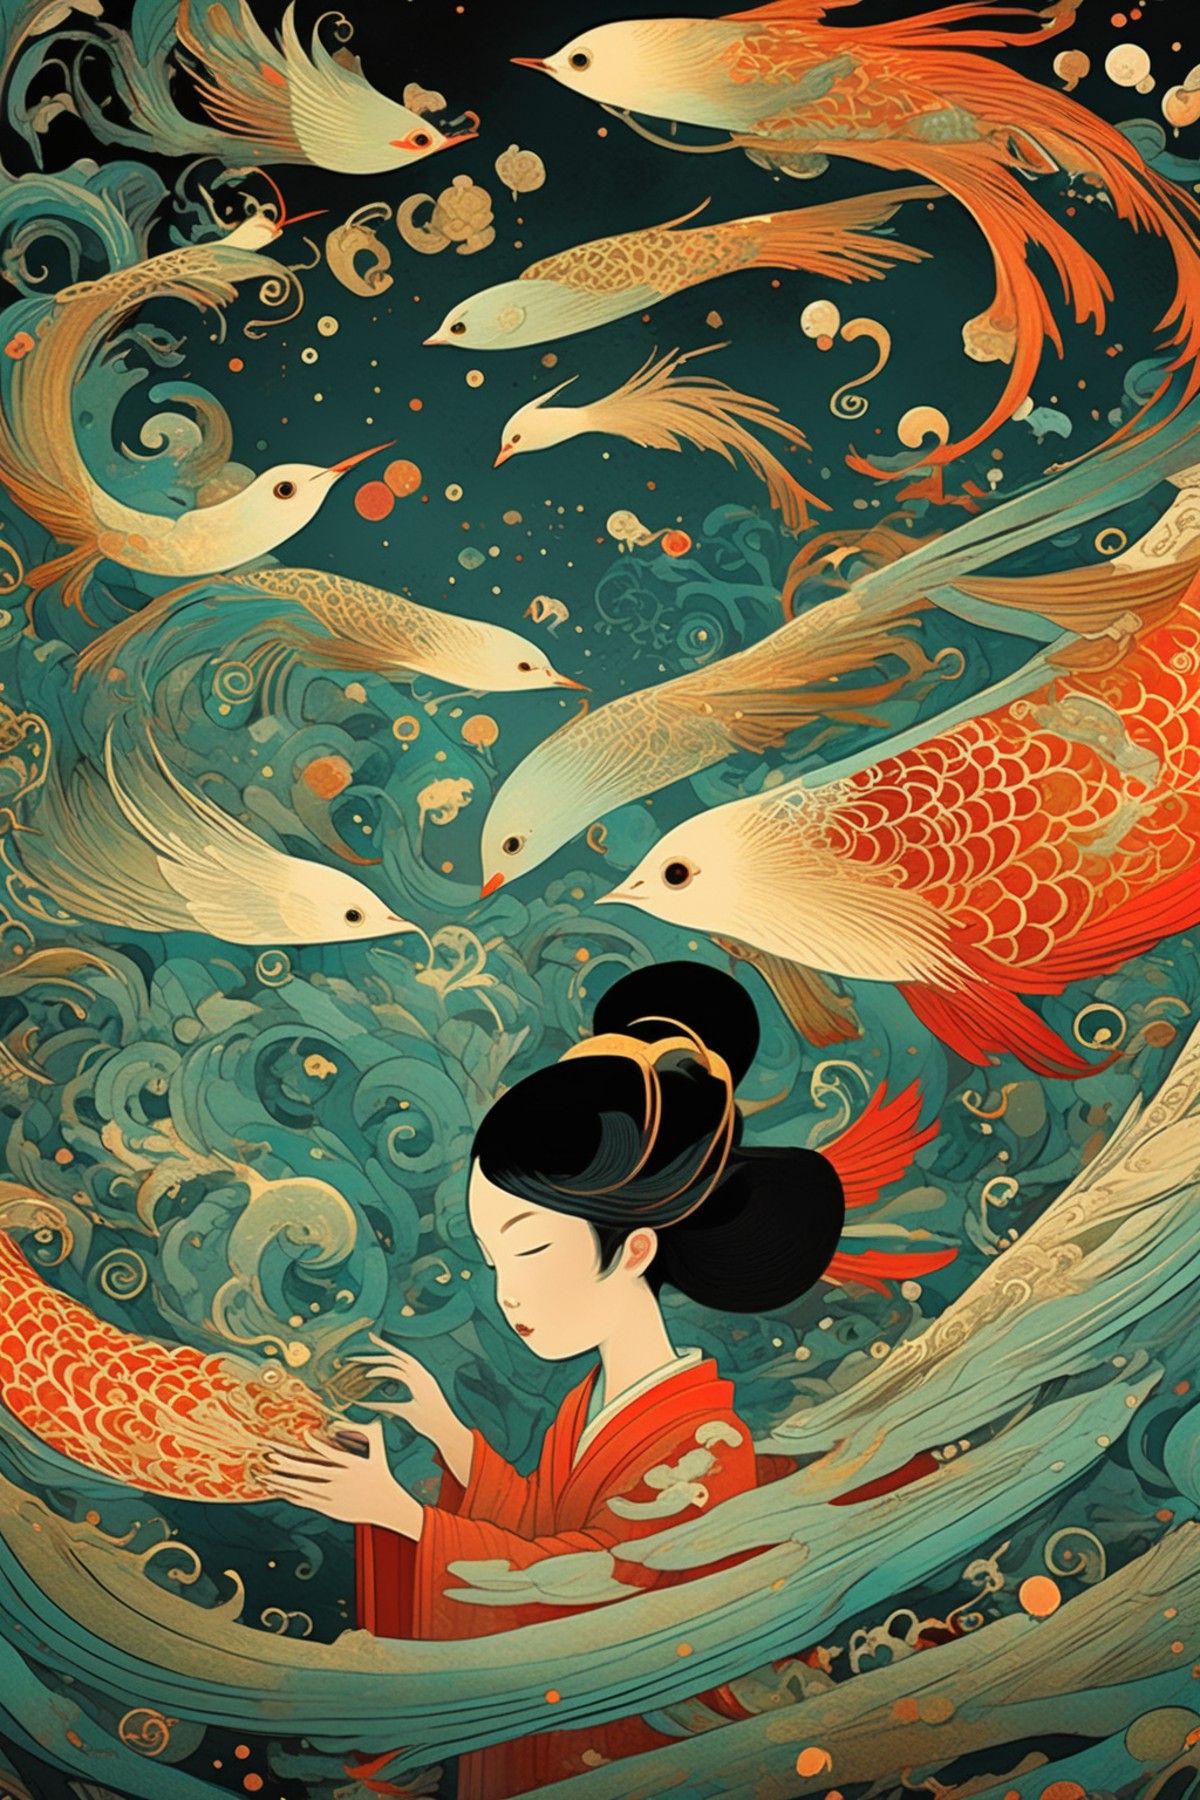 <lora:Victo Ngai Style:1>Victo Ngai Style - Create a visually captivating digital artwork inspired by Victo Ngai's intrica...